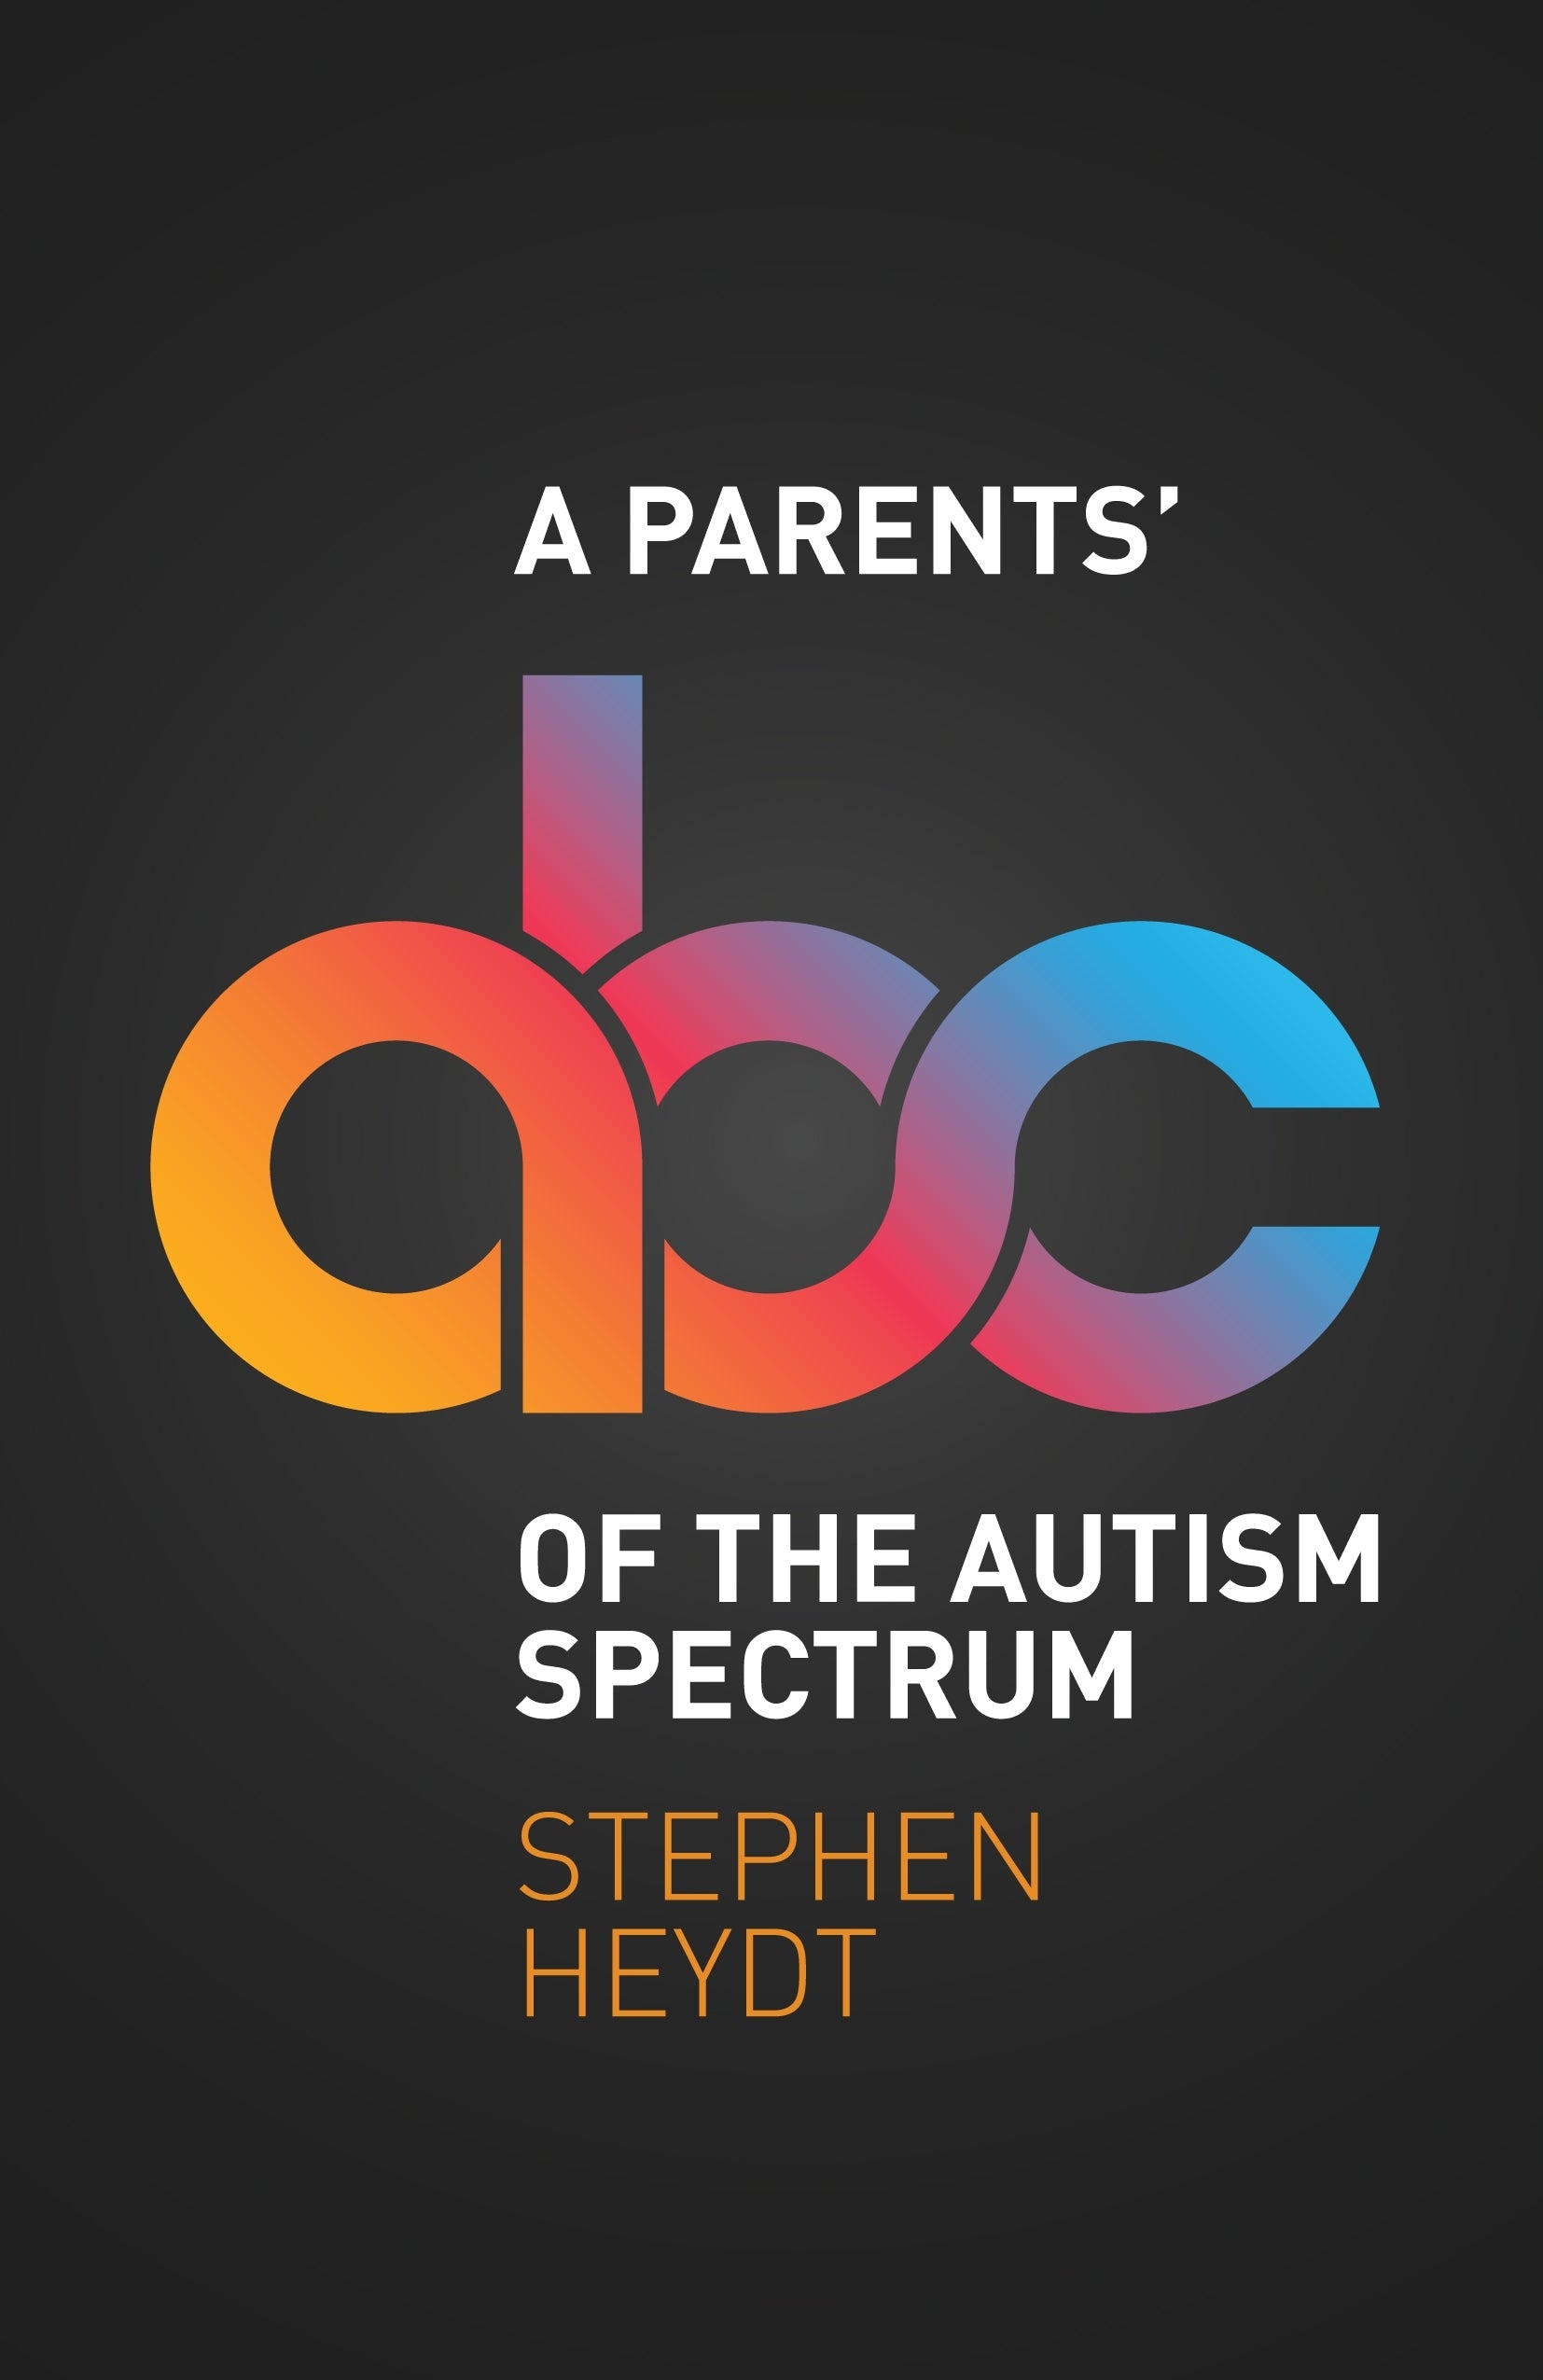 A Parents' ABC of the Autism Spectrum by Stephen Heydt